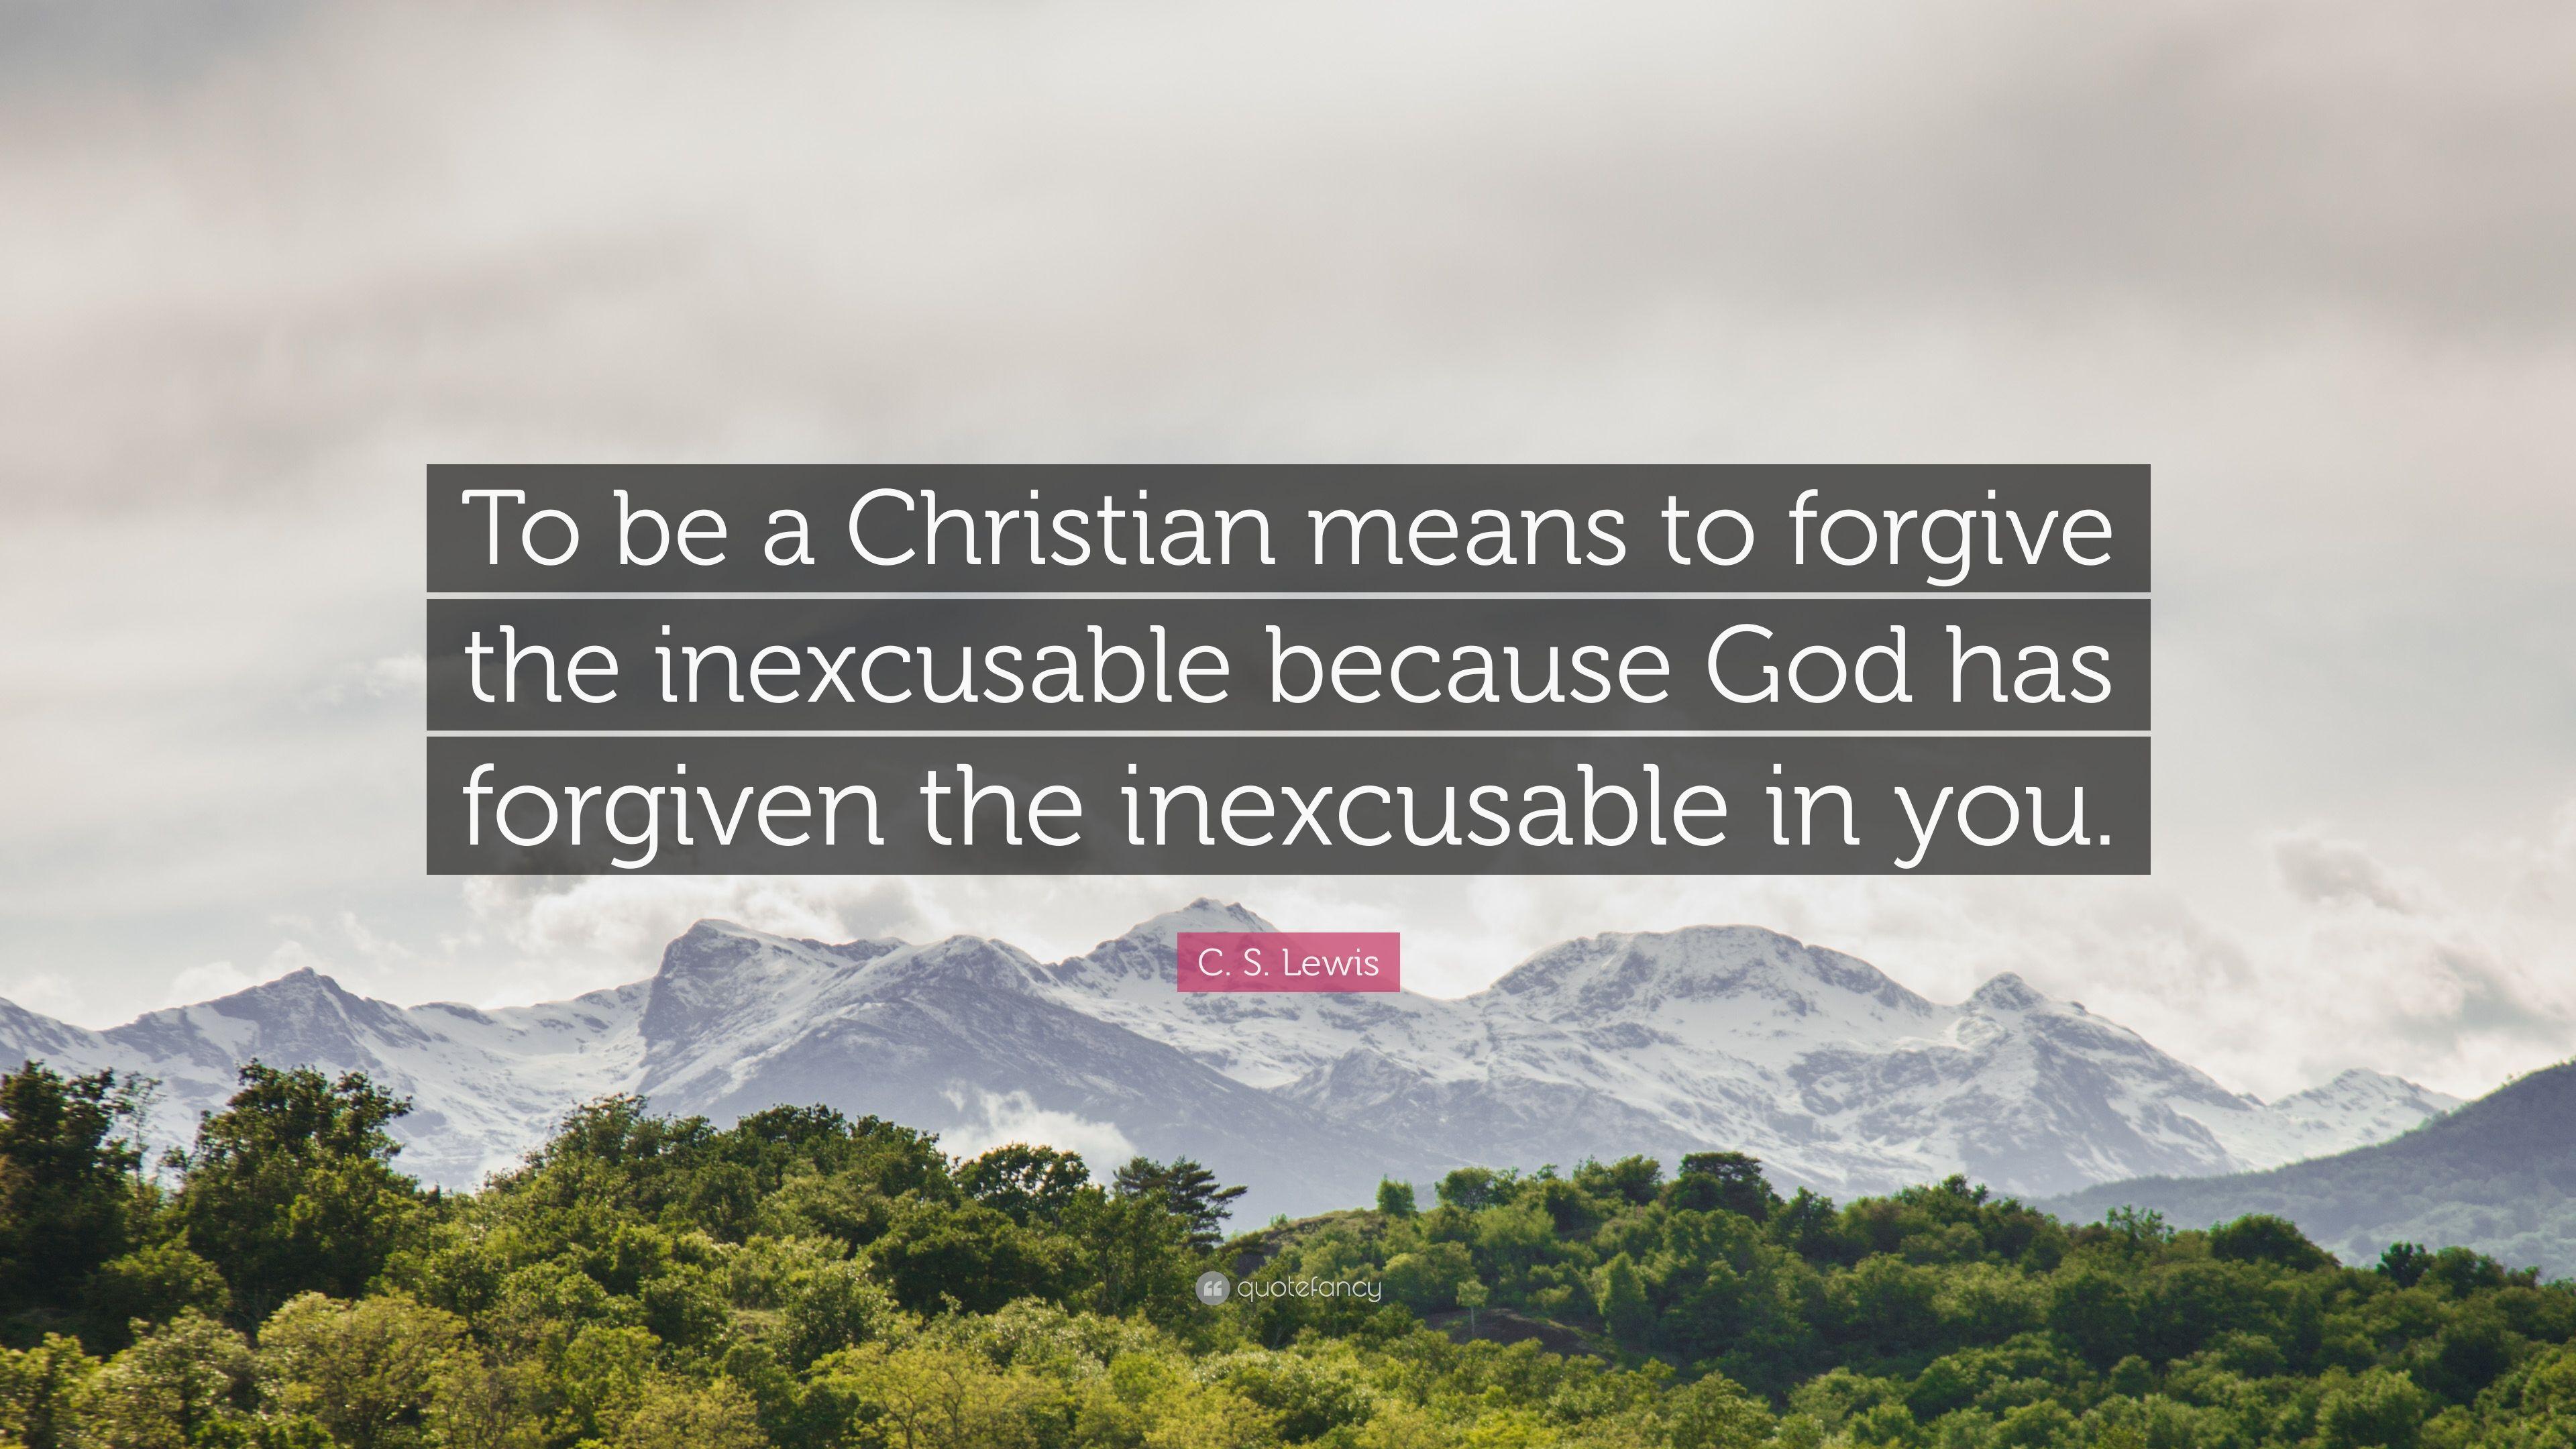 C. S. Lewis Quote: “To be a Christian means to forgive